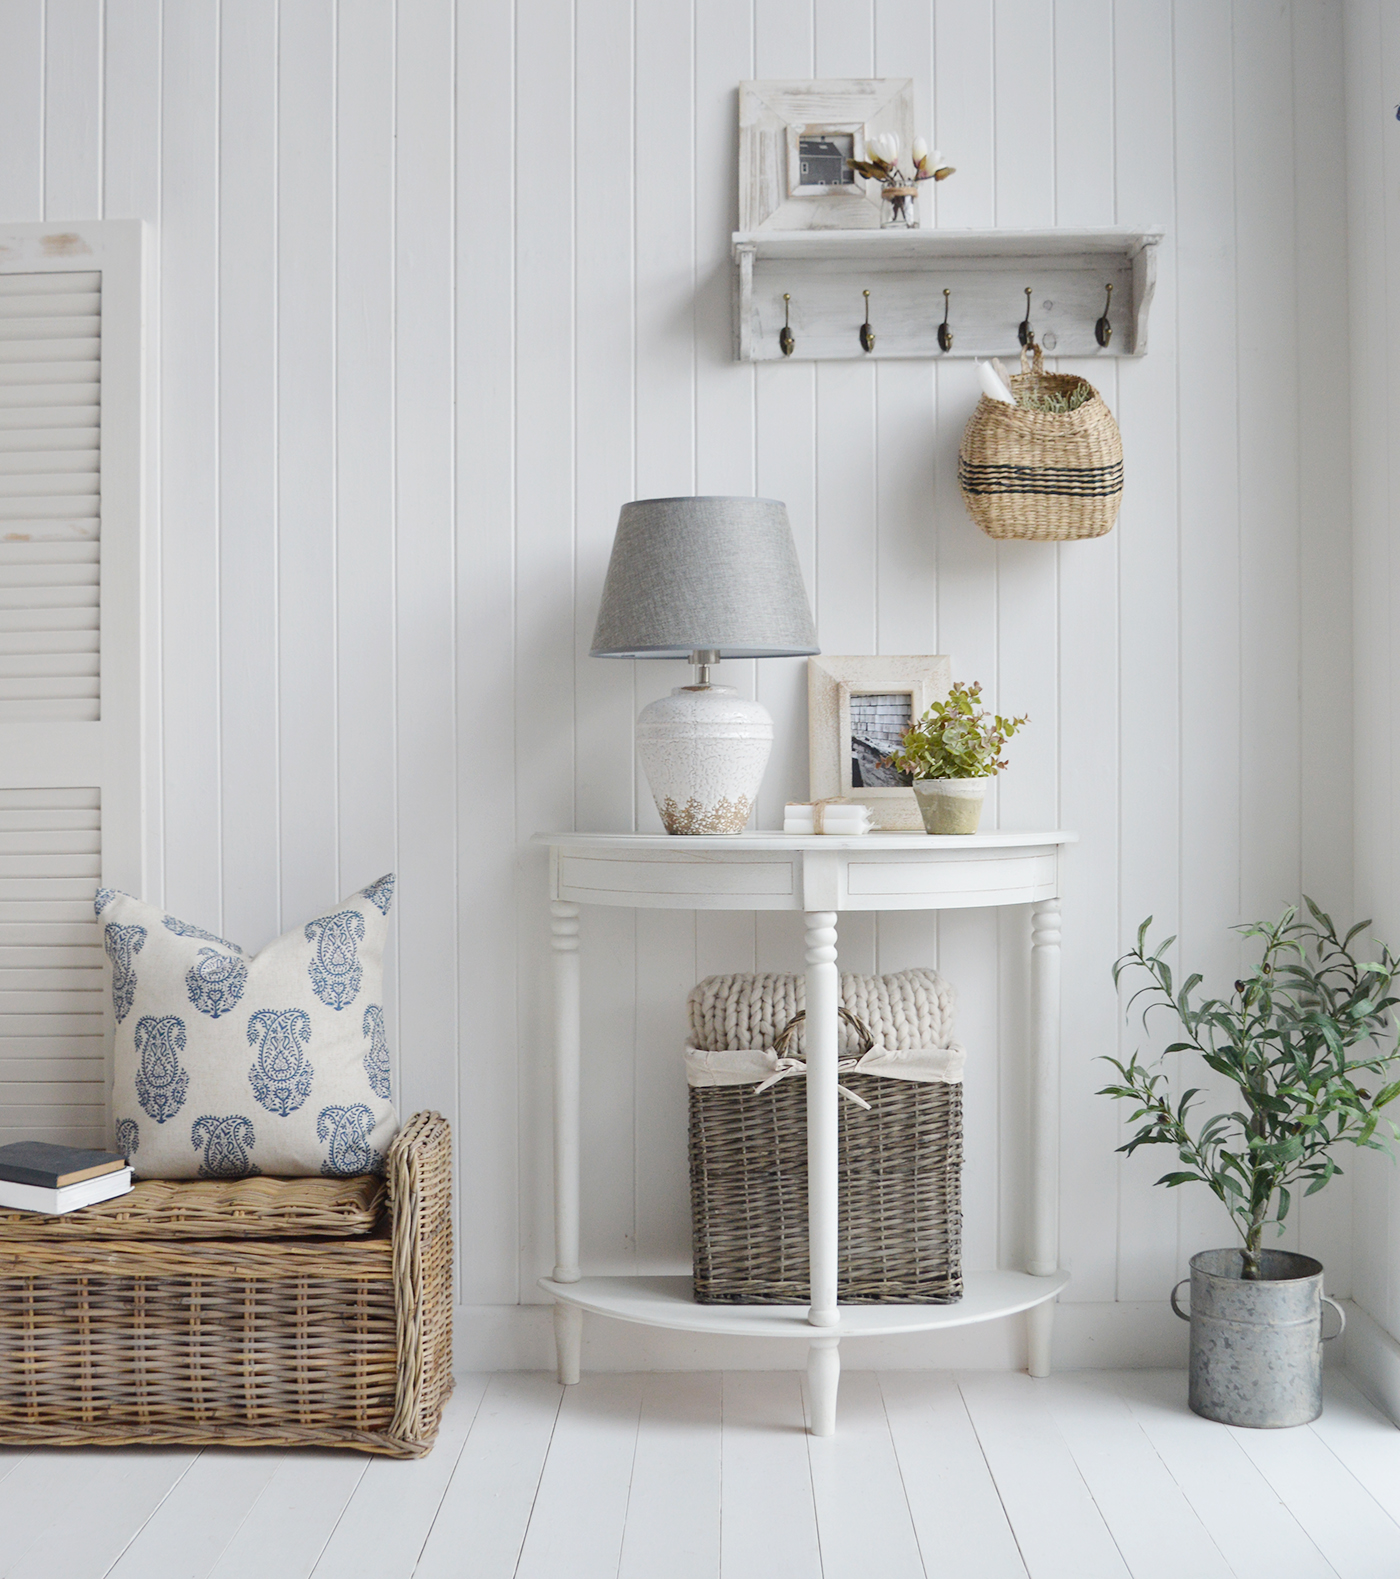 White Console table with a shelf in a hal moon shape for narrow hallways in New England style homes, a perfect little piece for coastal furniture